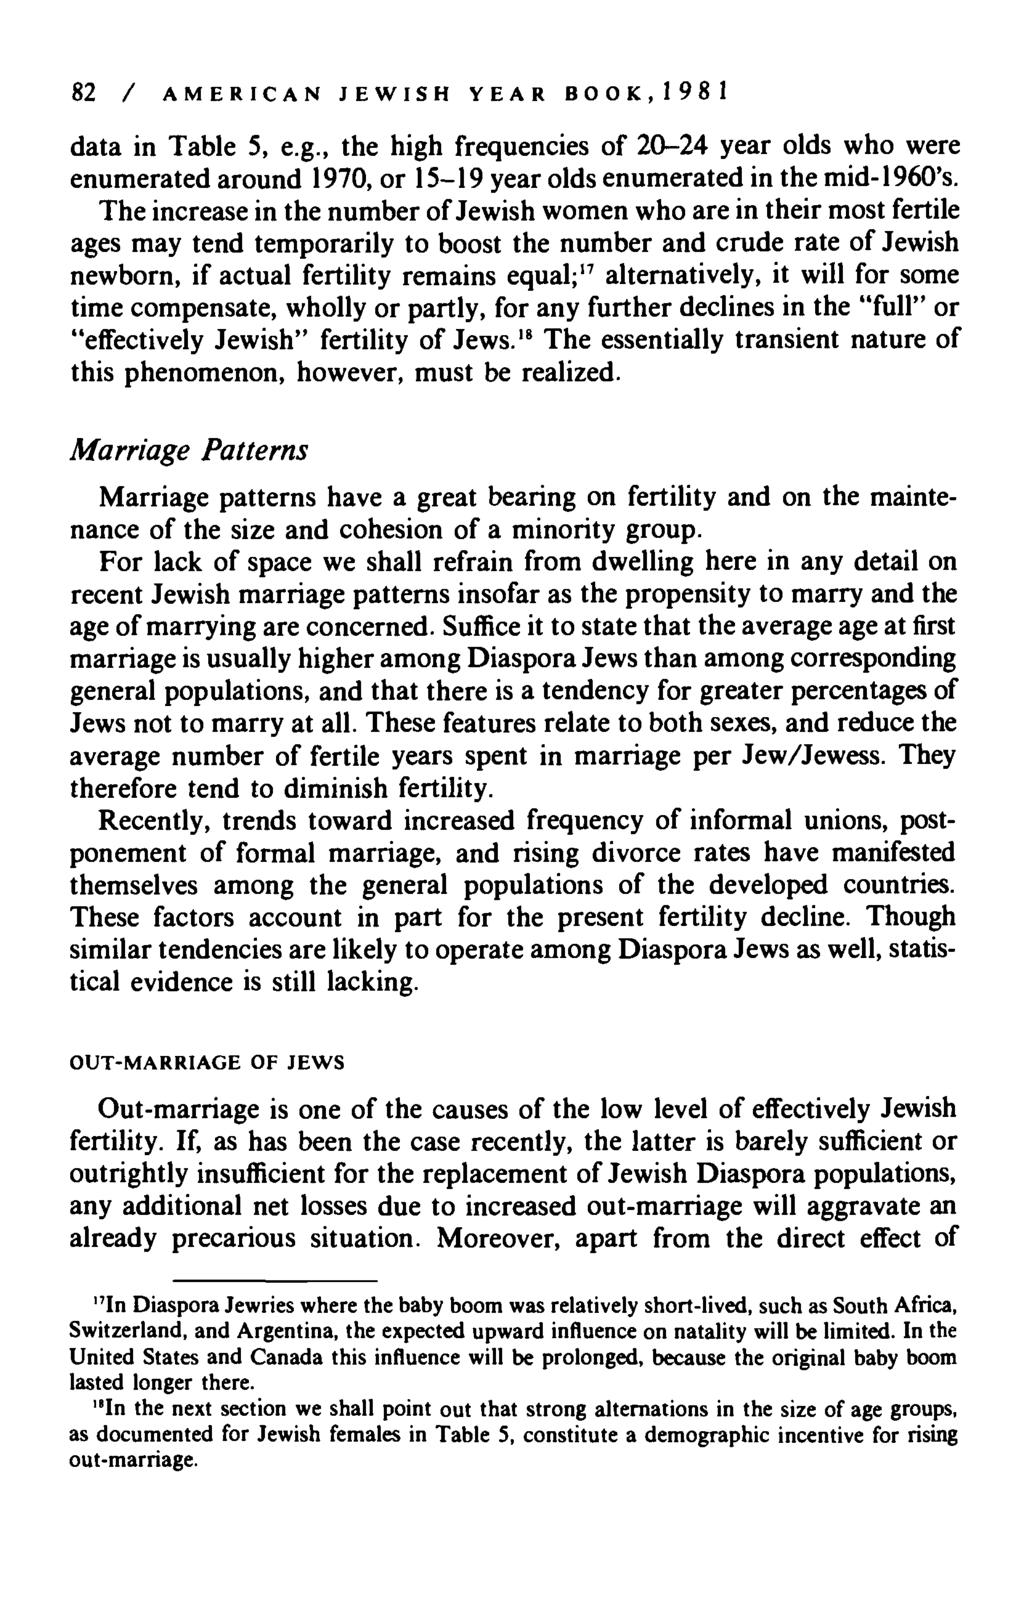 82 / AMERICAN JEWISH YEAR BOOK, 1981 data in Table 5, e.g., the high frequencies of 20-24 year olds who were enumerated around 1970, or 15-19 year olds enumerated in the mid-1960's.